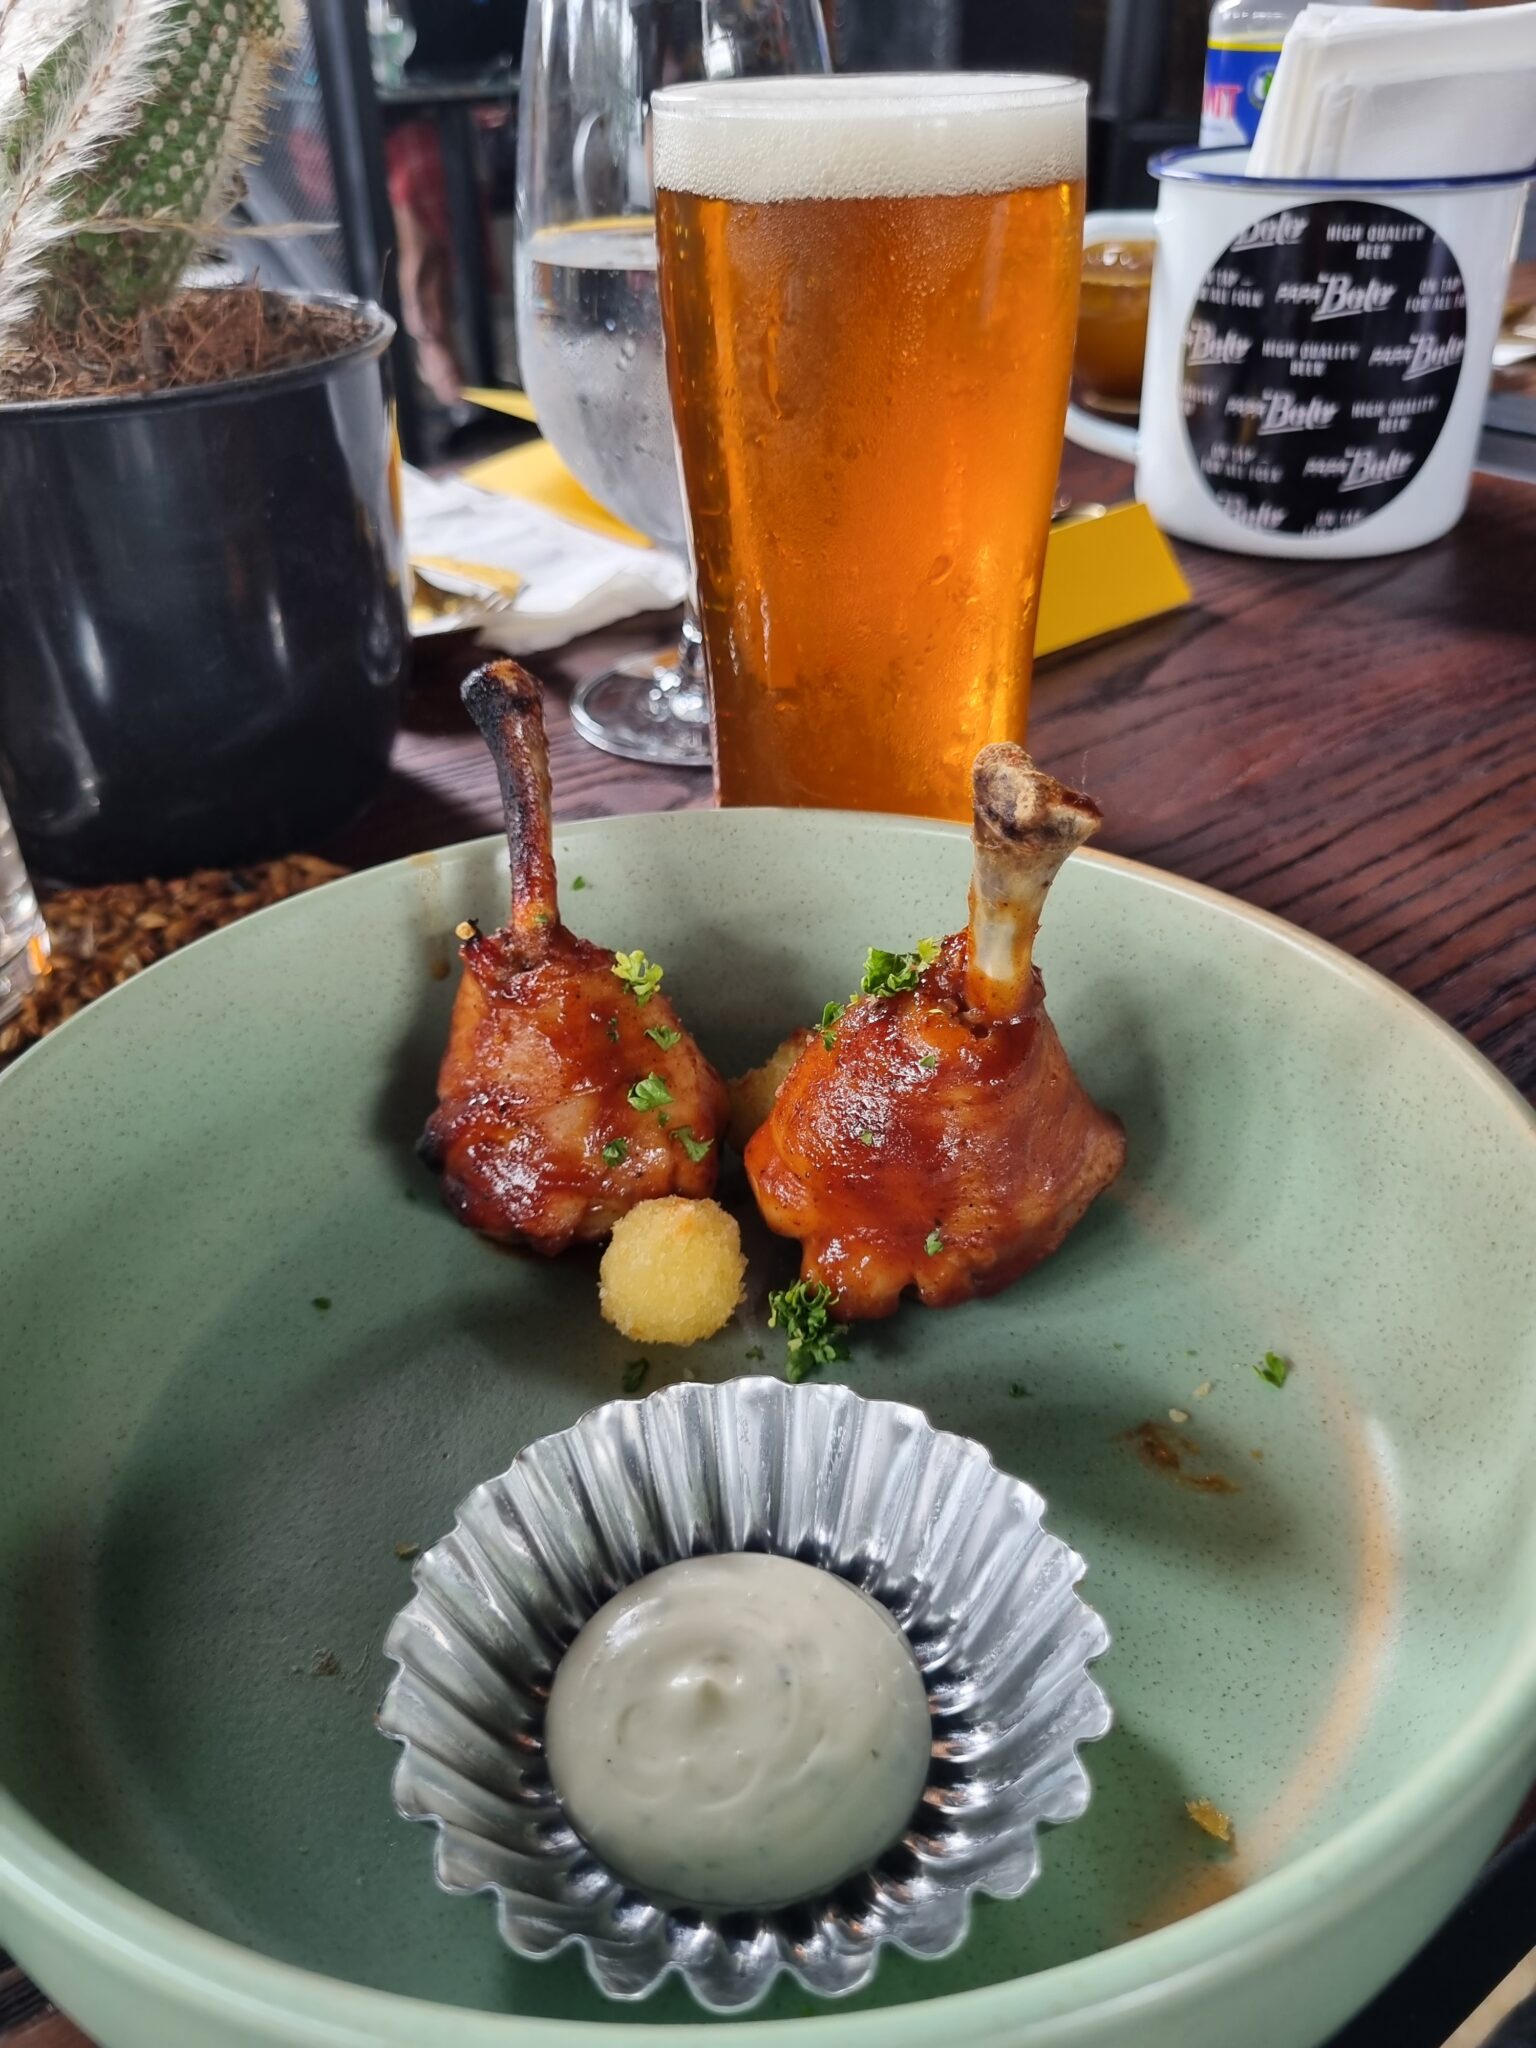 Papa Bolo's Bad Pony Paired with Chicken Lollipop